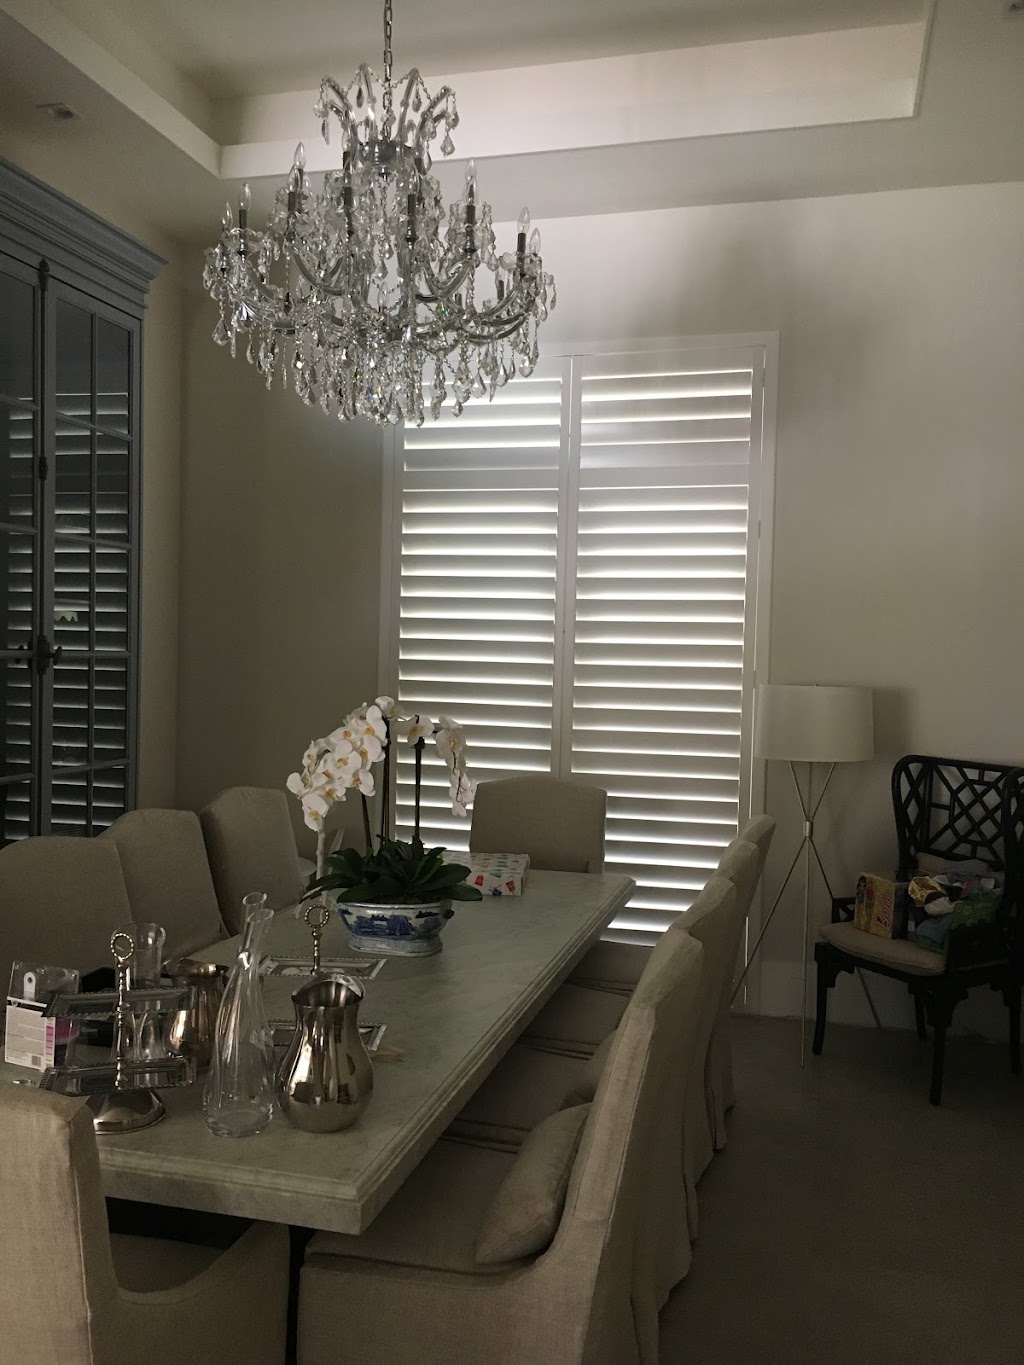 Plantation Shutters In Miami By Just Blinds Miami Inc. | 12845 SW 102nd Ct, Miami, FL 33176 | Phone: (305) 796-3662